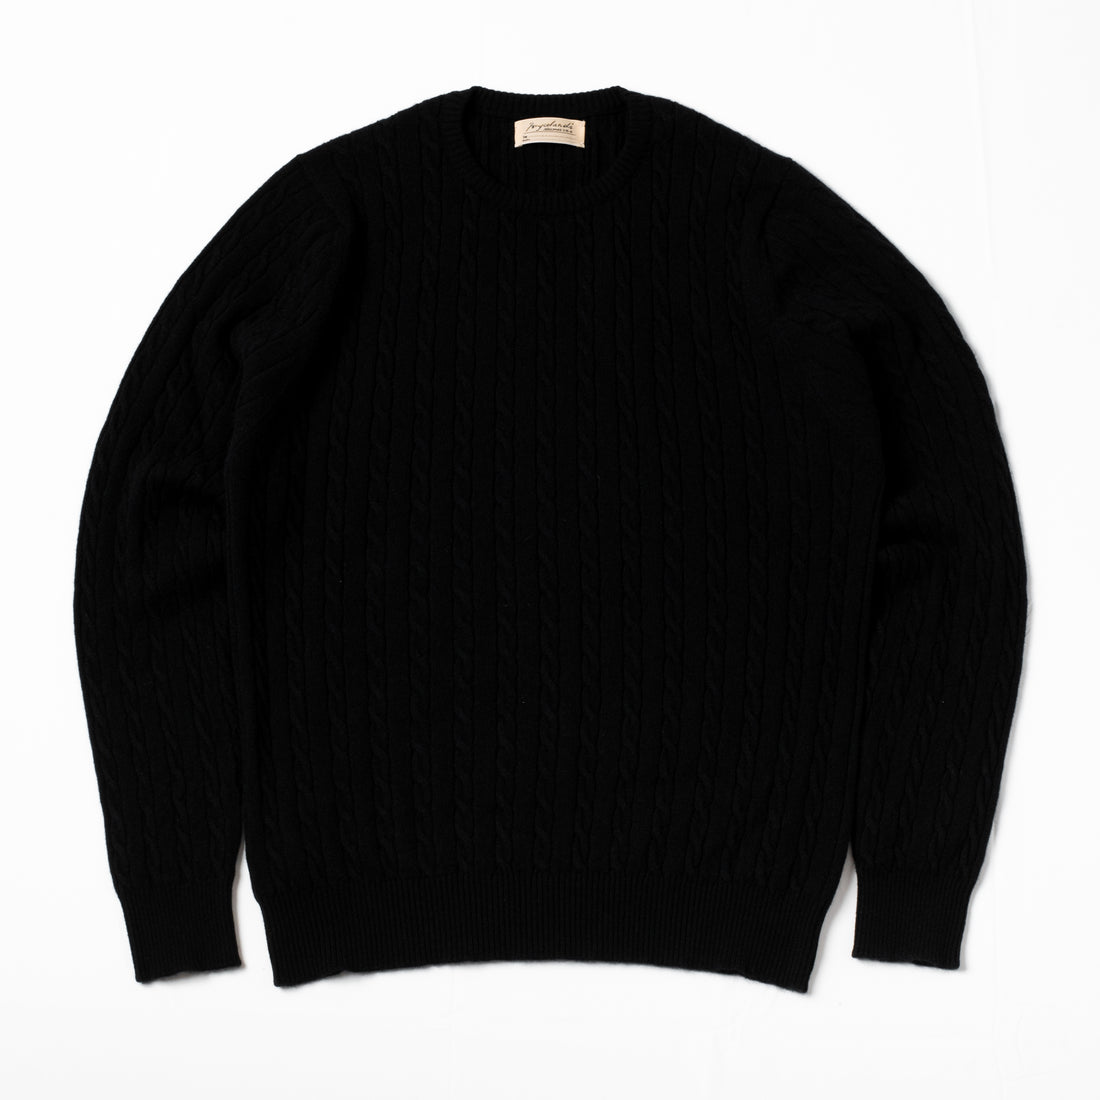 Bryceland's Cable-Knit Crewneck Pullover Black